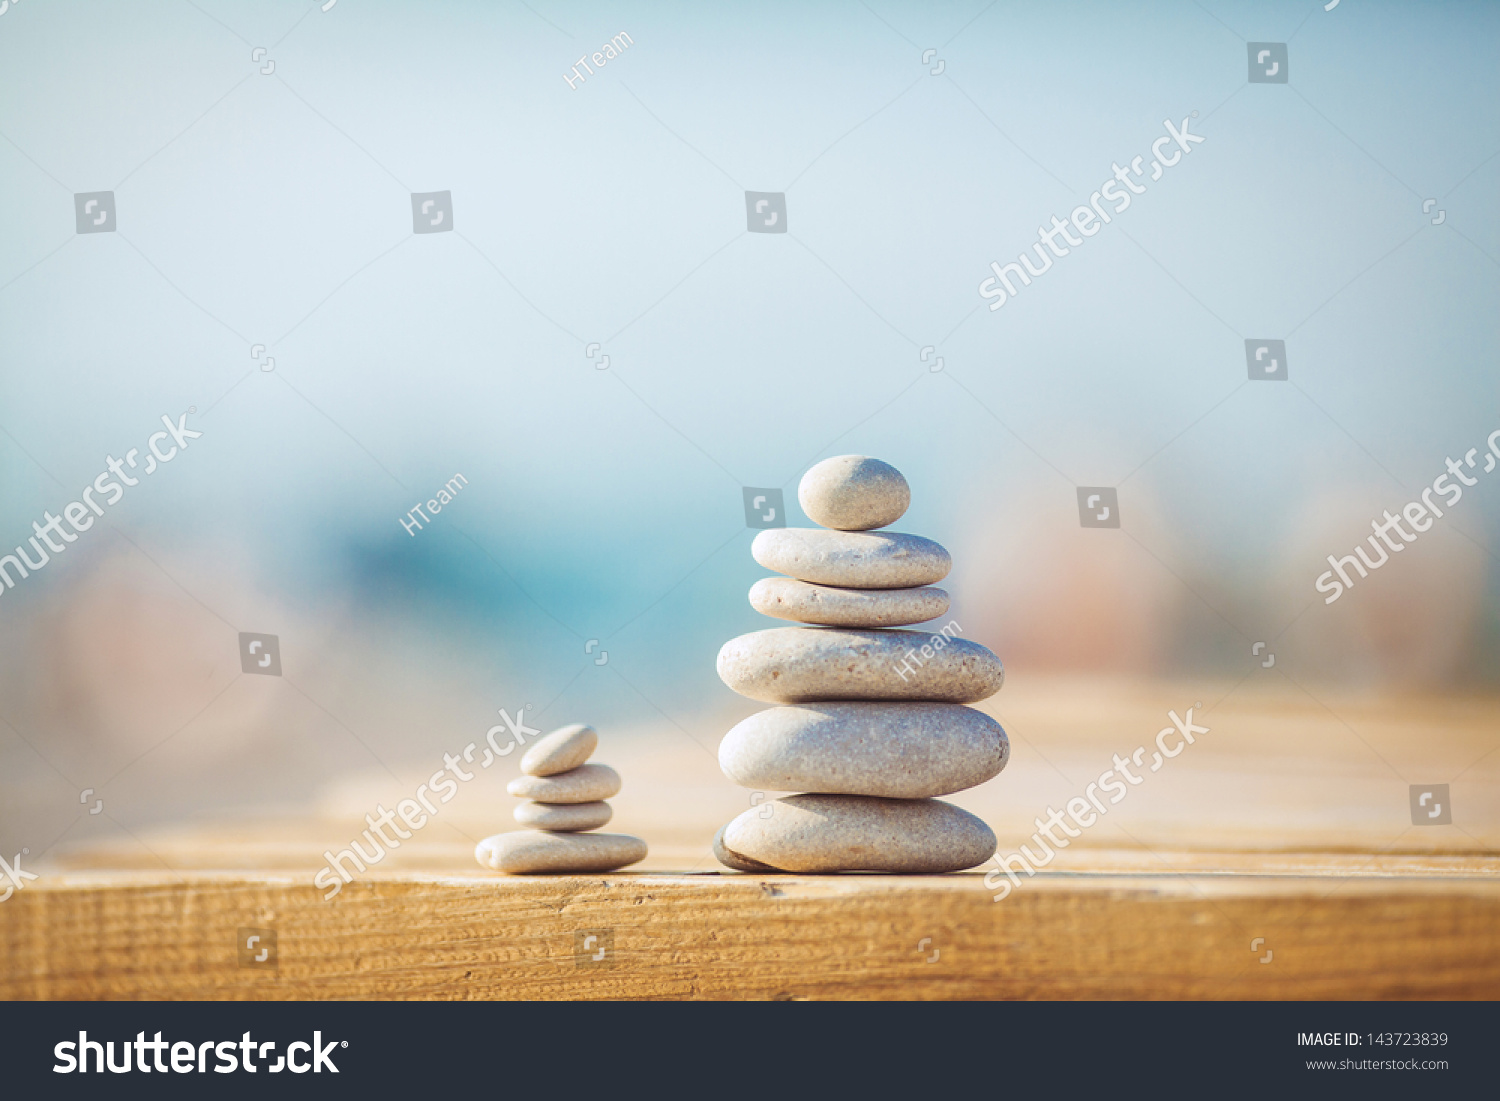 zen stones on wooden banch on the beach near sea. Outdoor. en style path on vintage wood table in relaxing wellness holistic spa for relaxation and good health rejuvenation #143723839